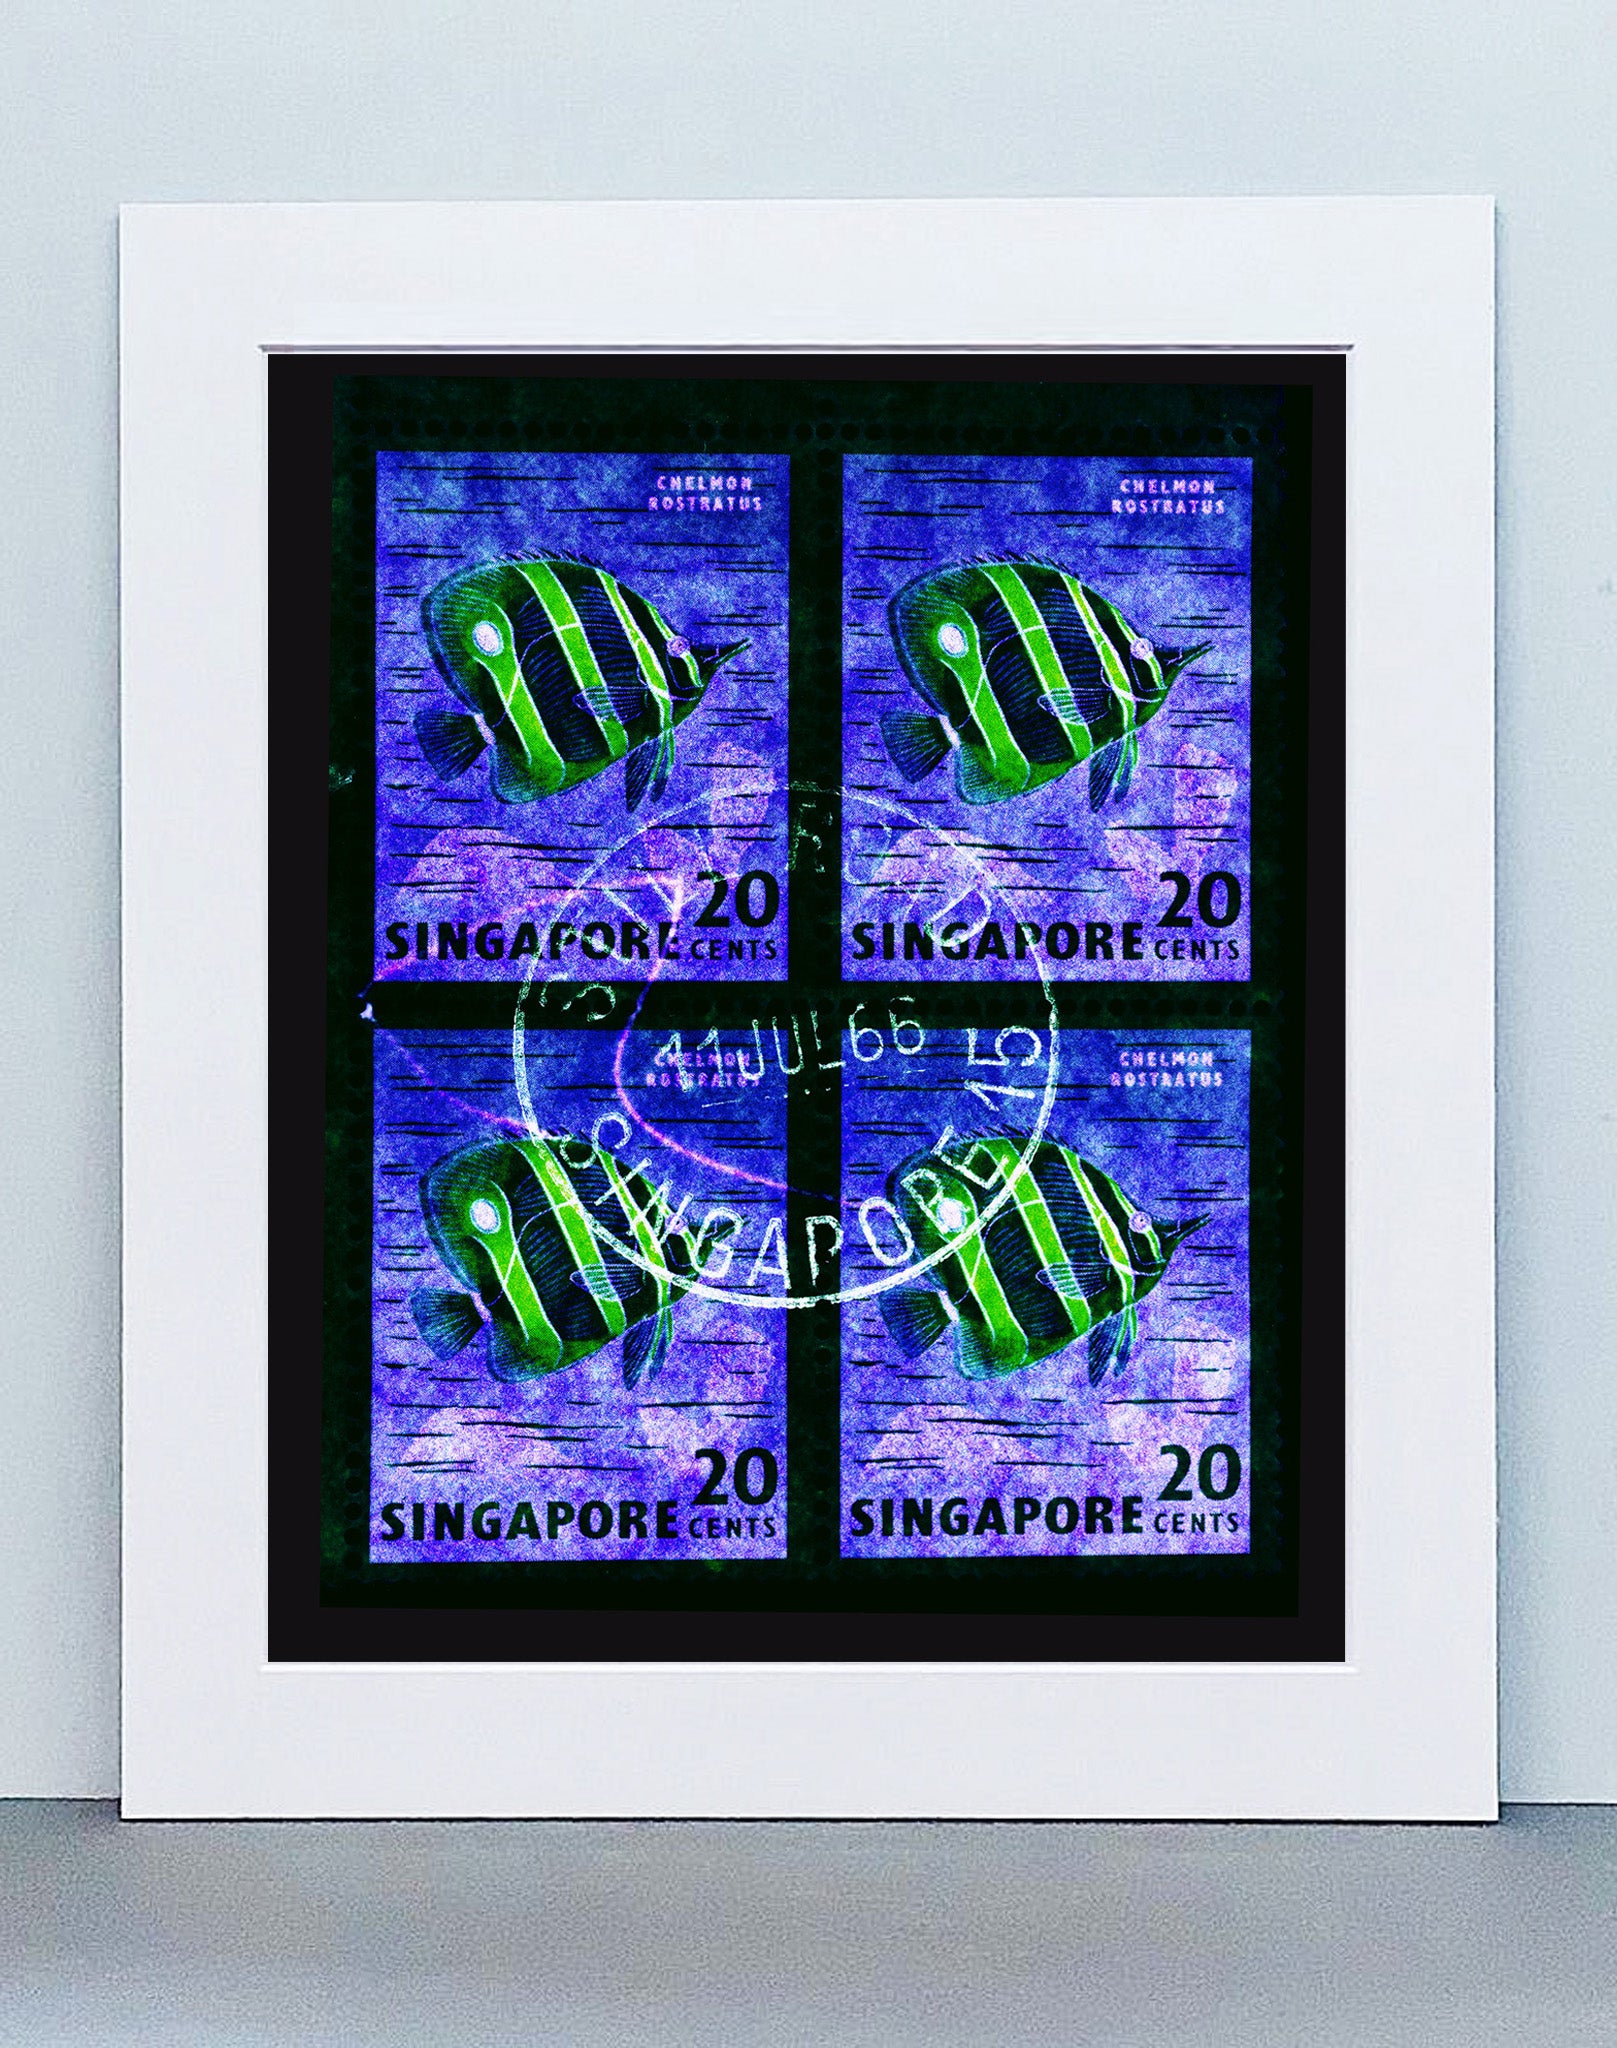 20 Cents Singapore Butterfly Fish (Gold). These historic postage stamps that make up the Heidler & Heeps Stamp Collection, Singapore Series “Postcards from Afar” have been given a twenty-first century pop art lease of life. The fine detailed tapestry of the original small postage stamp has been brought to life, made unique by the franking stamp and Heidler & Heeps specialist darkroom process.